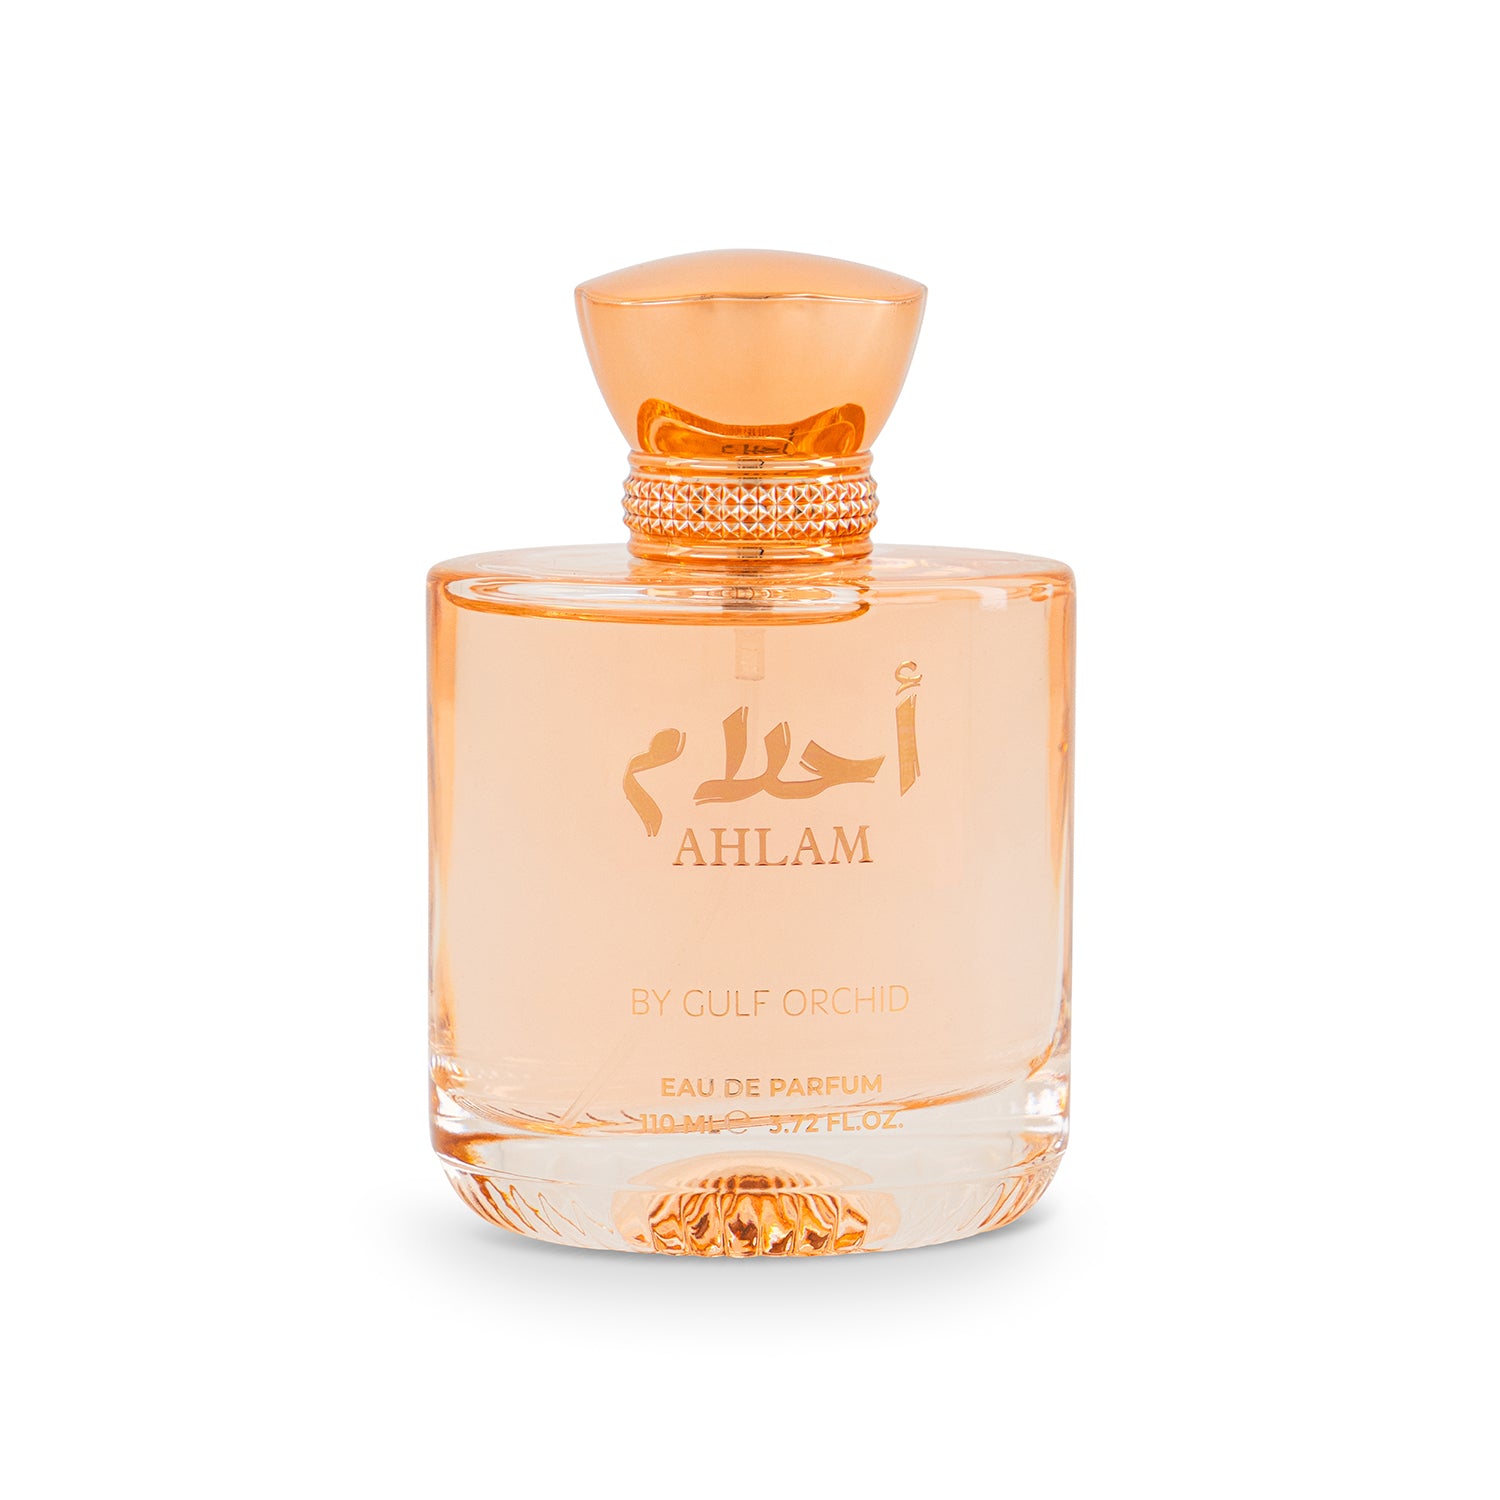 "Ahlam" is an delight perfume that belongs to the Oriental Floral olfactive family, designed to transport you to a world of elegance and sensuality. This is a symphony of captivating notes that unfold in harmonious layers, creates a sensory experience that is both alluring and memorable.